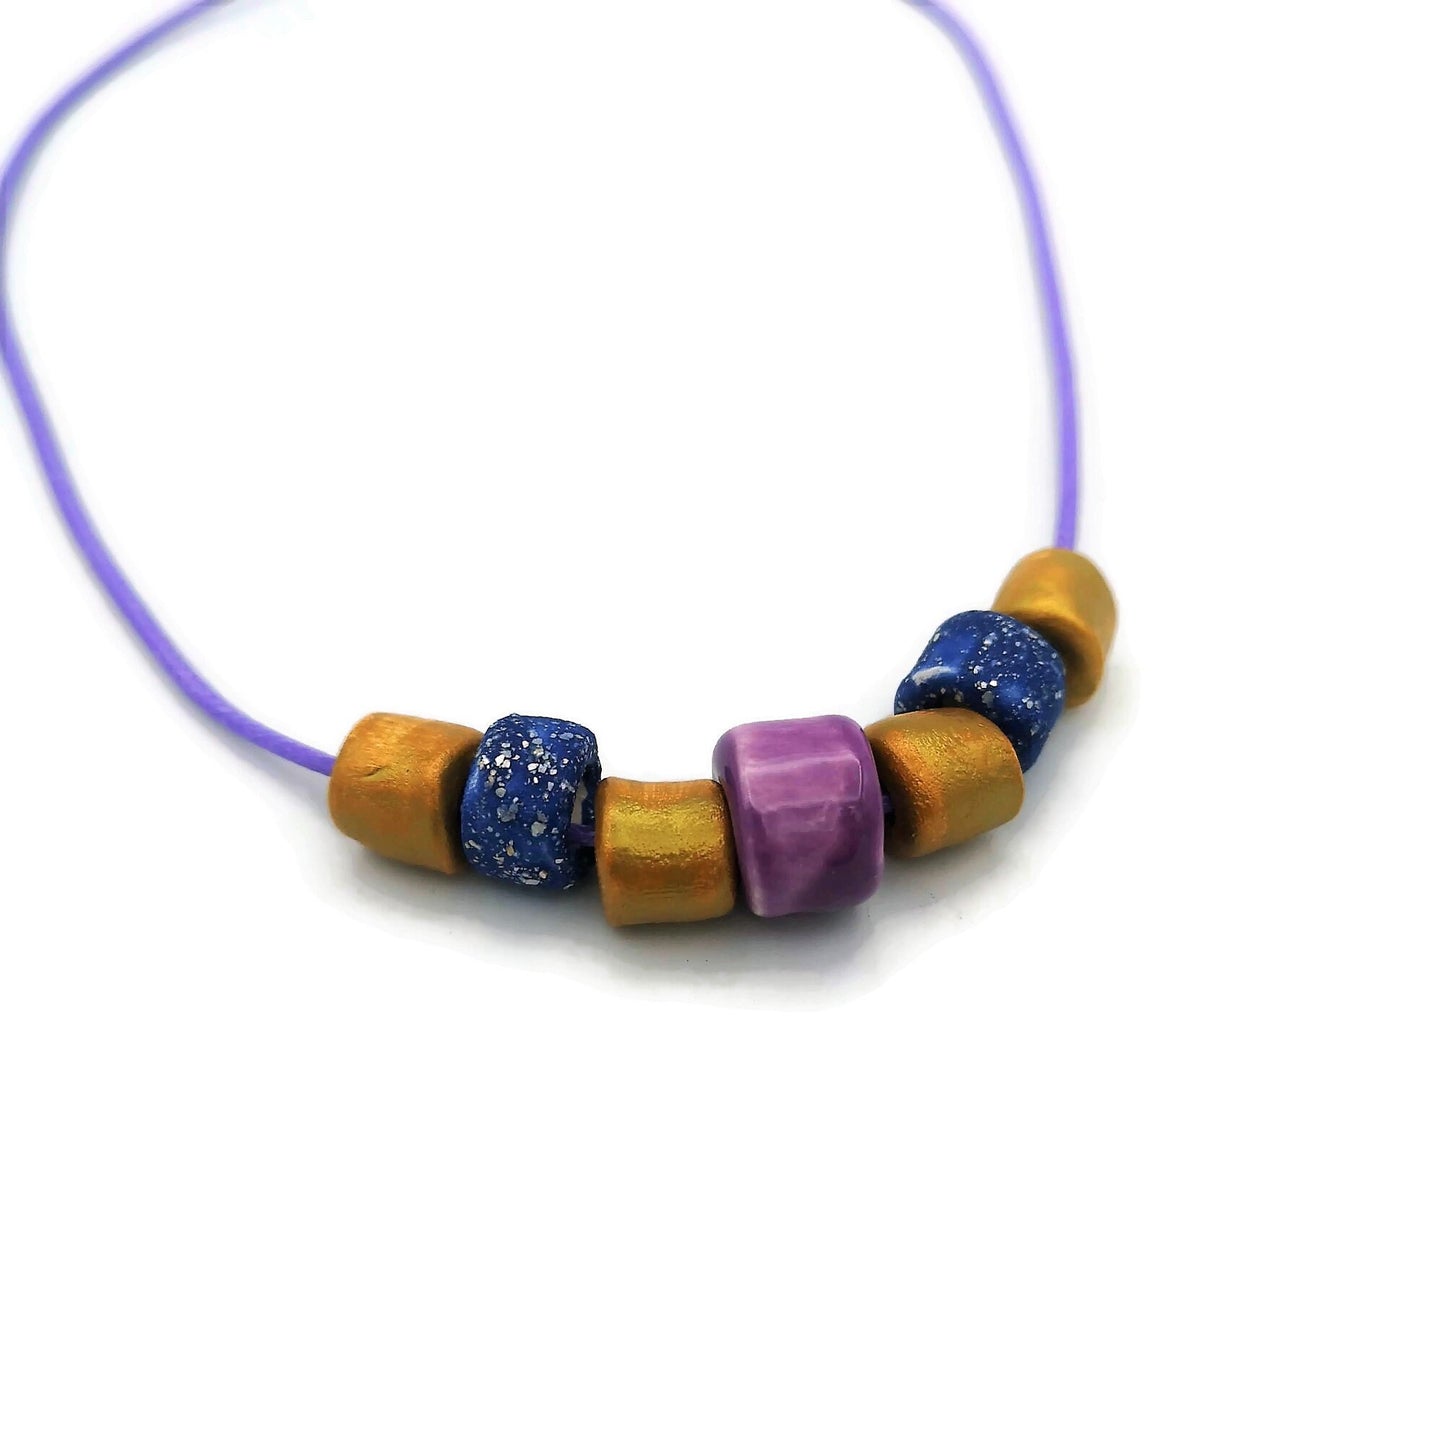 Everyday Necklace, Trendy Beaded Necklace Best Gifts For Her, Colorful Aesthetic Mothers Day Gift From Daugher, Boho Statement Necklace - Ceramica Ana Rafael